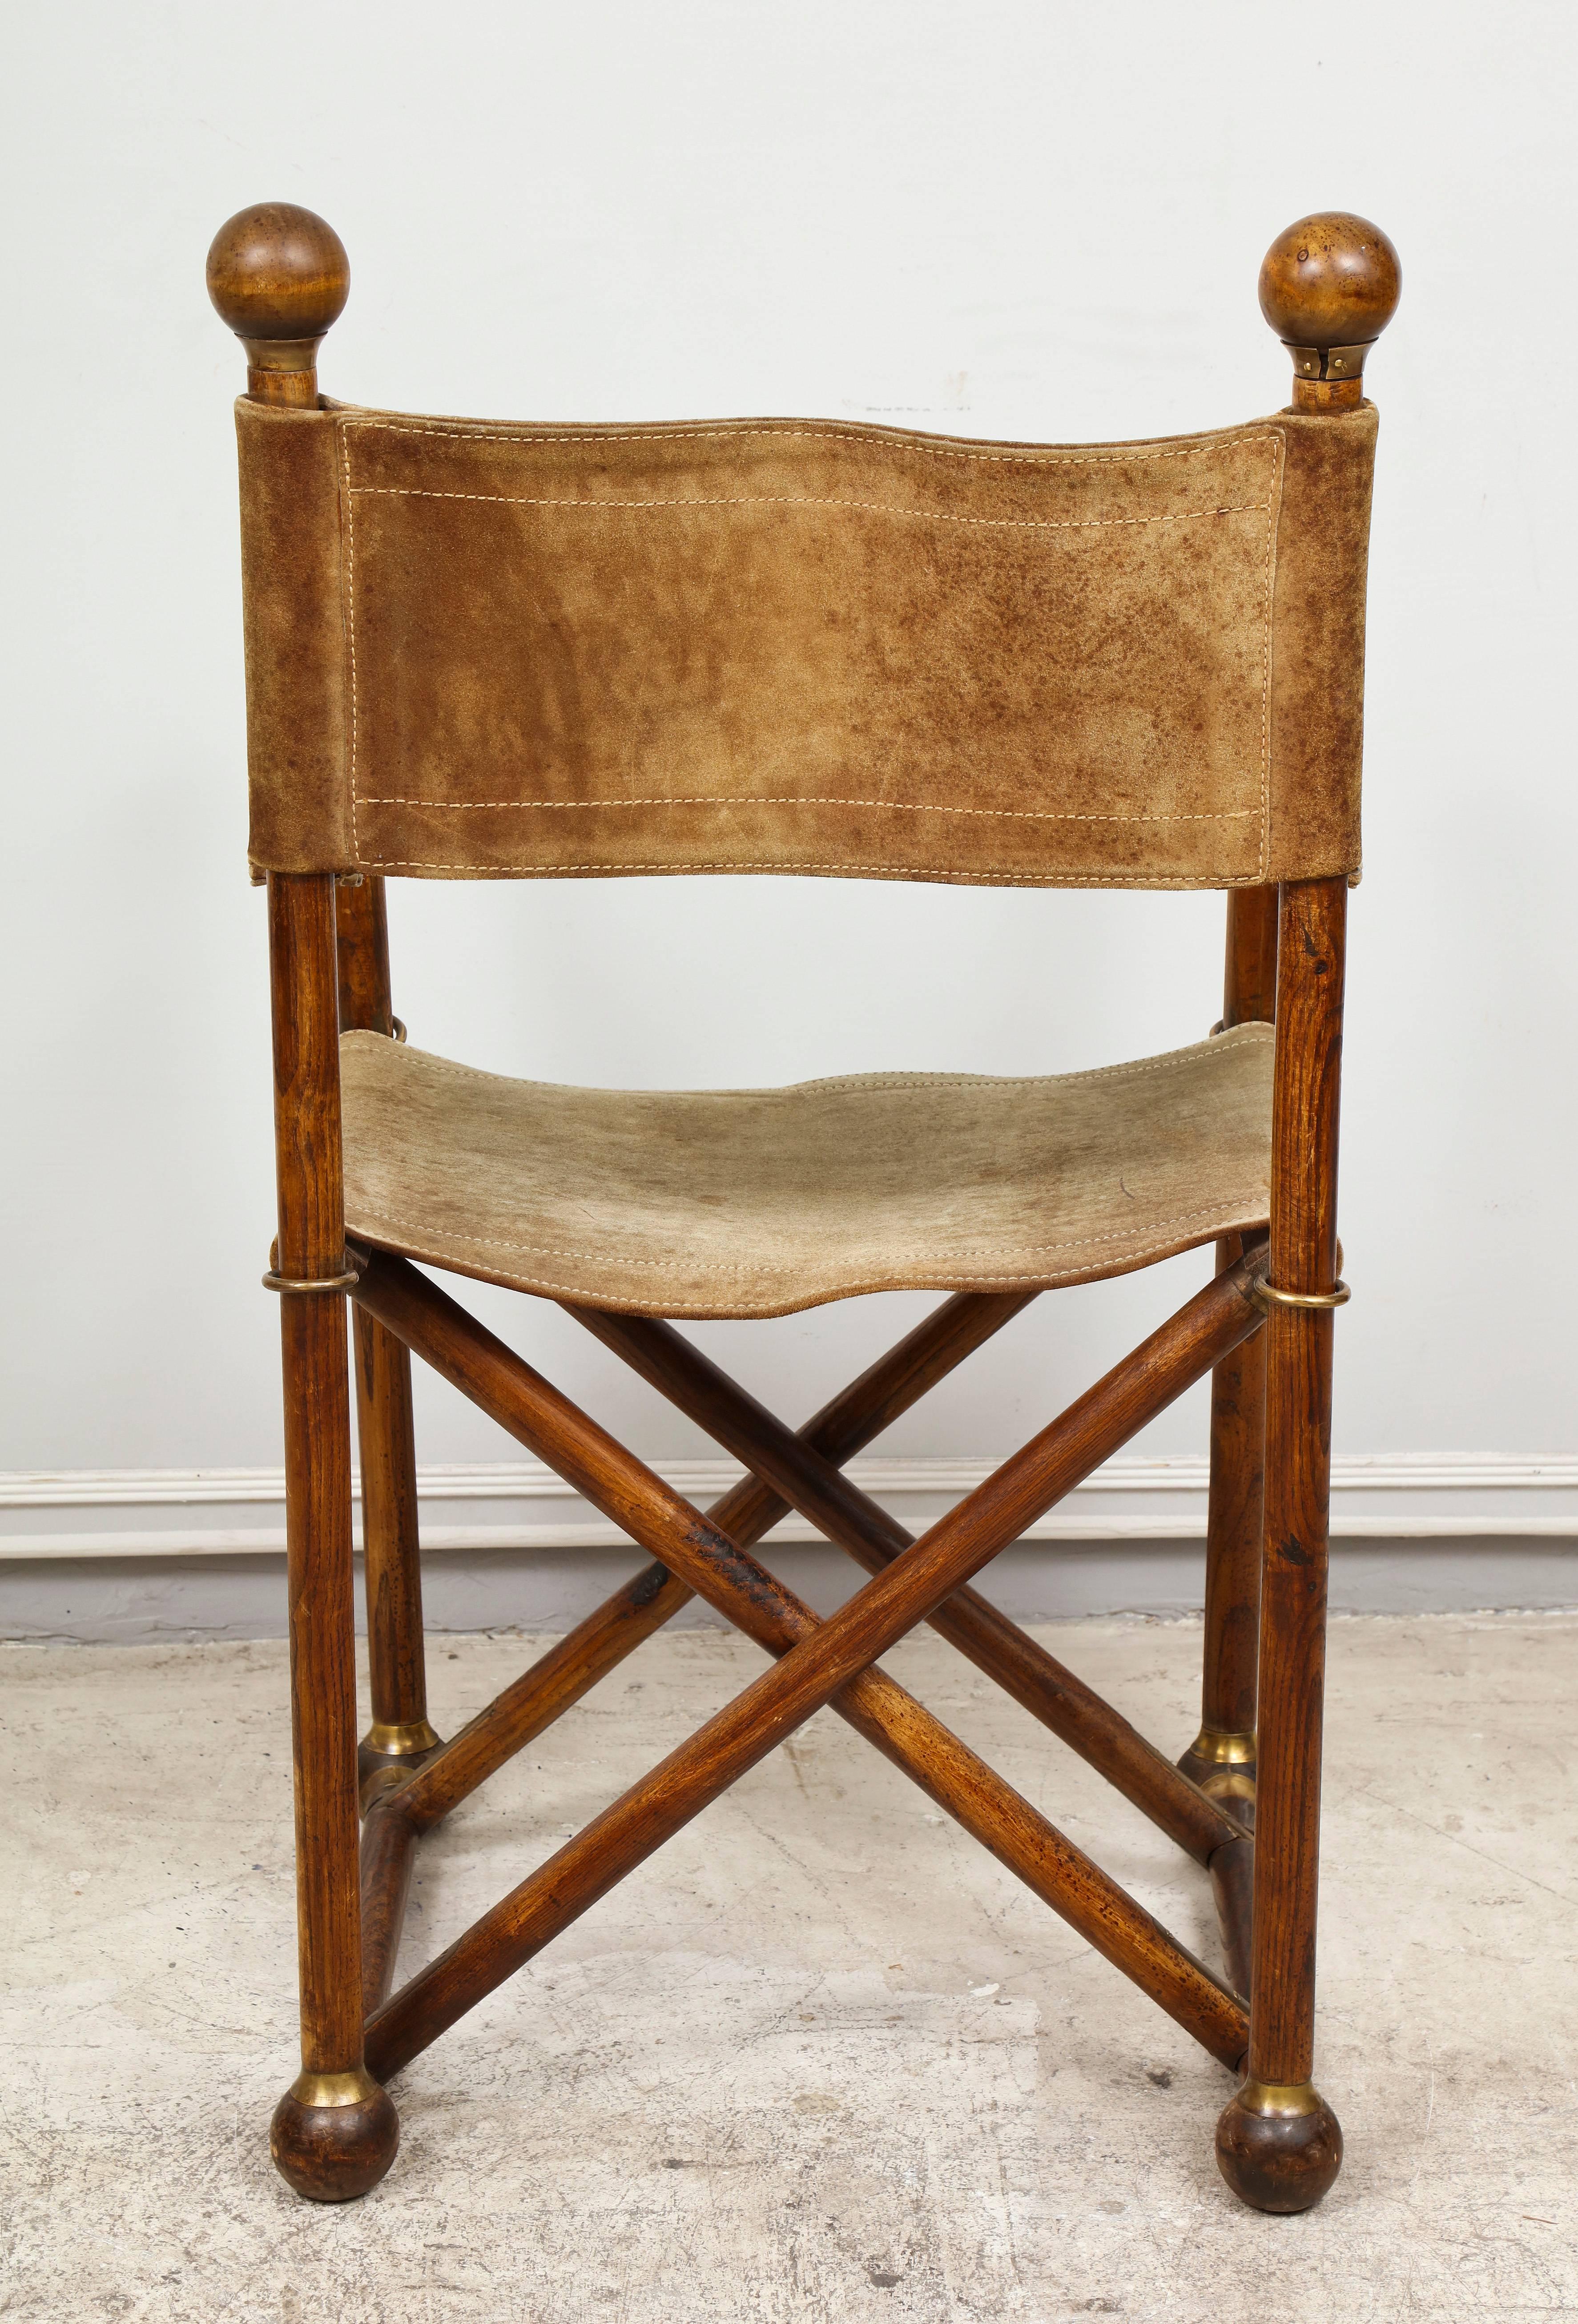 An exceptional pair of hand-stitched Suede Director's chairs with brass hardware on stretcher base, very comfortable and great quality.